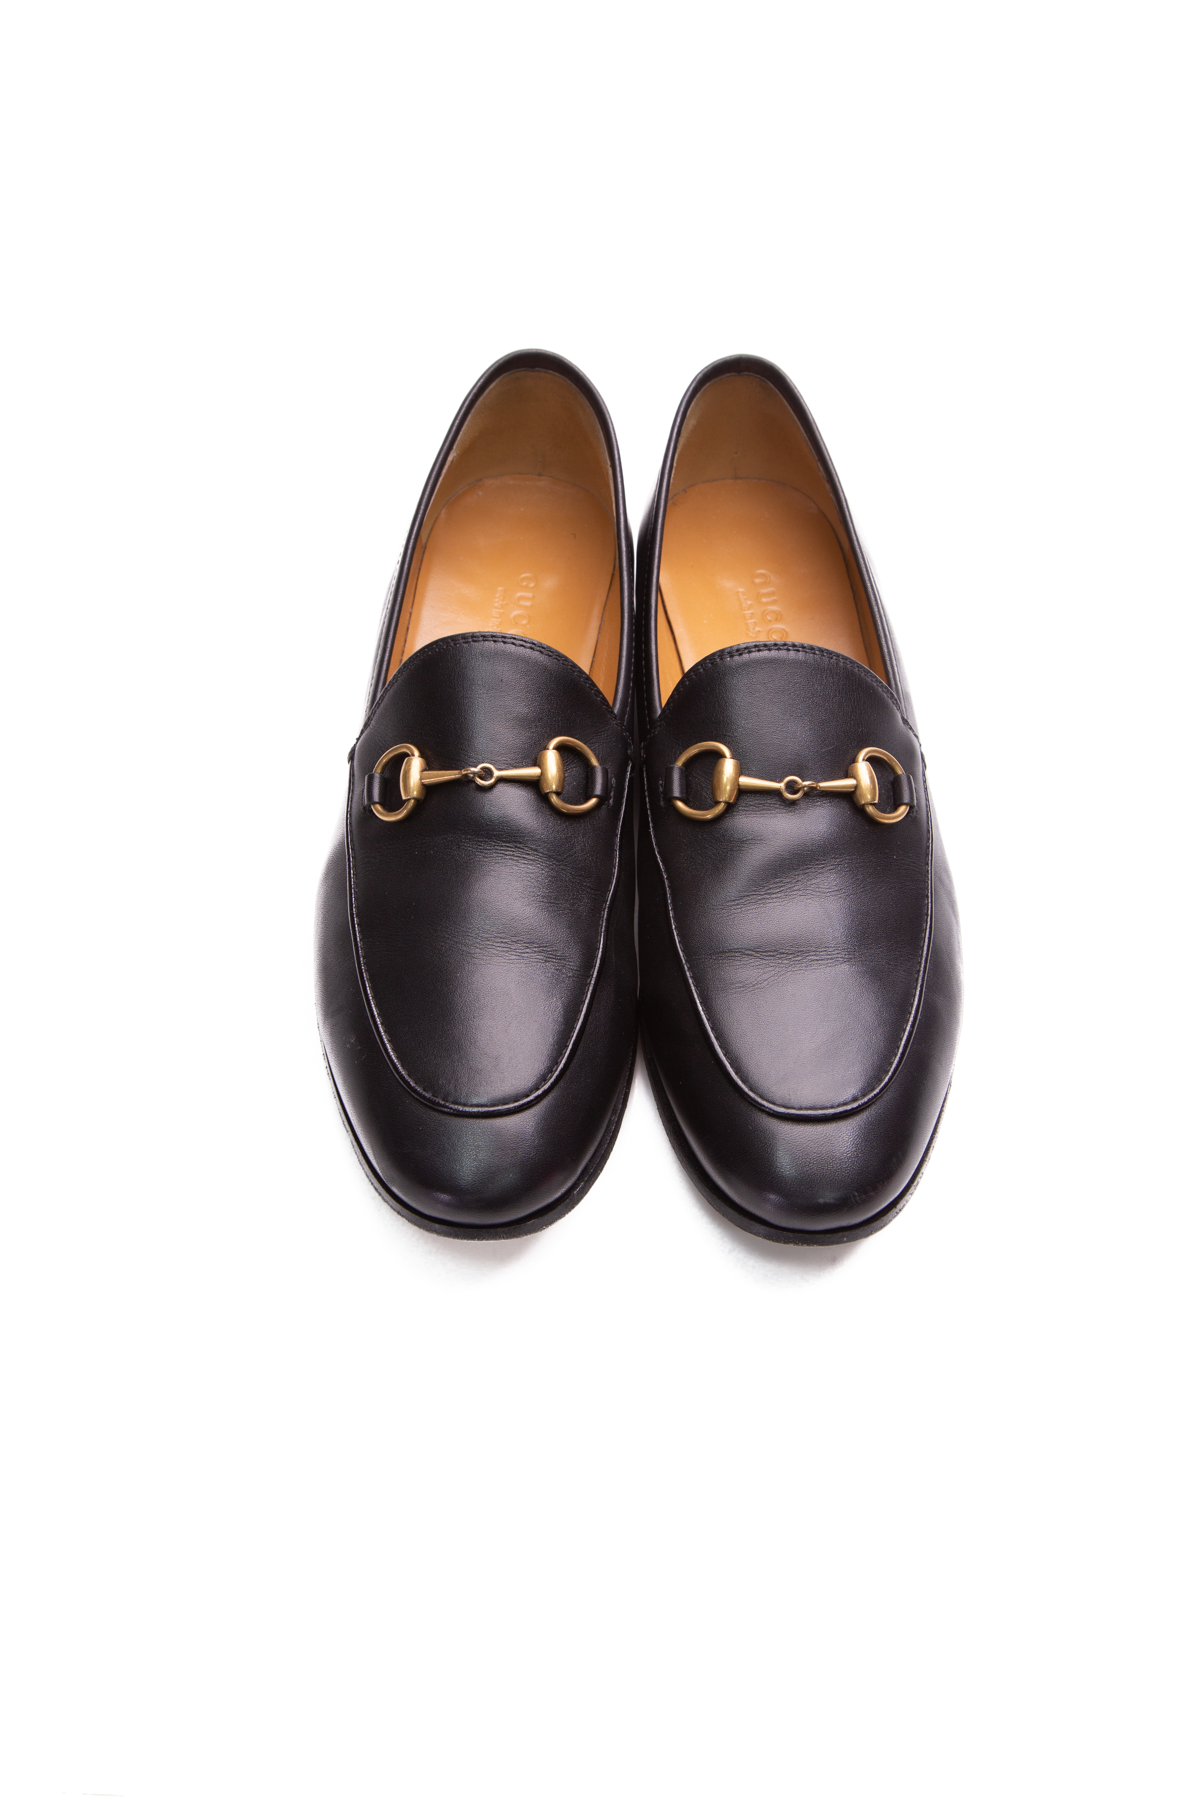 Gucci Black Jordaan Loafers - Size 37